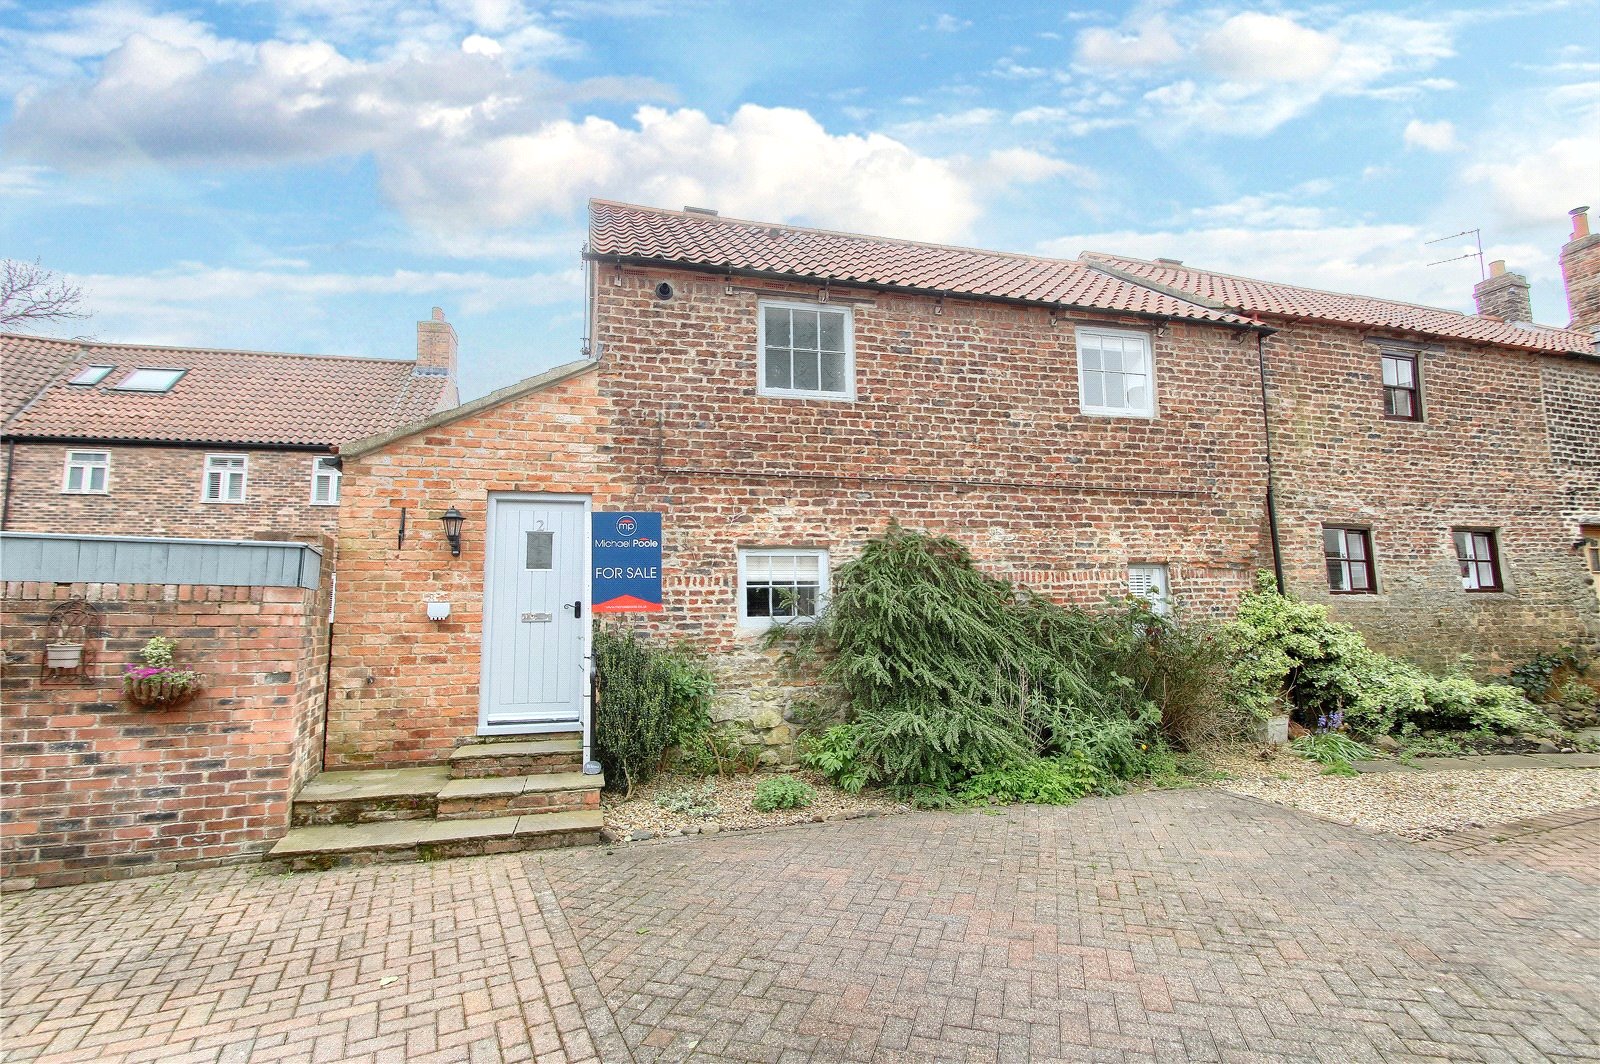 2 bed house for sale in Tom Browns Wynd, Yarm 1